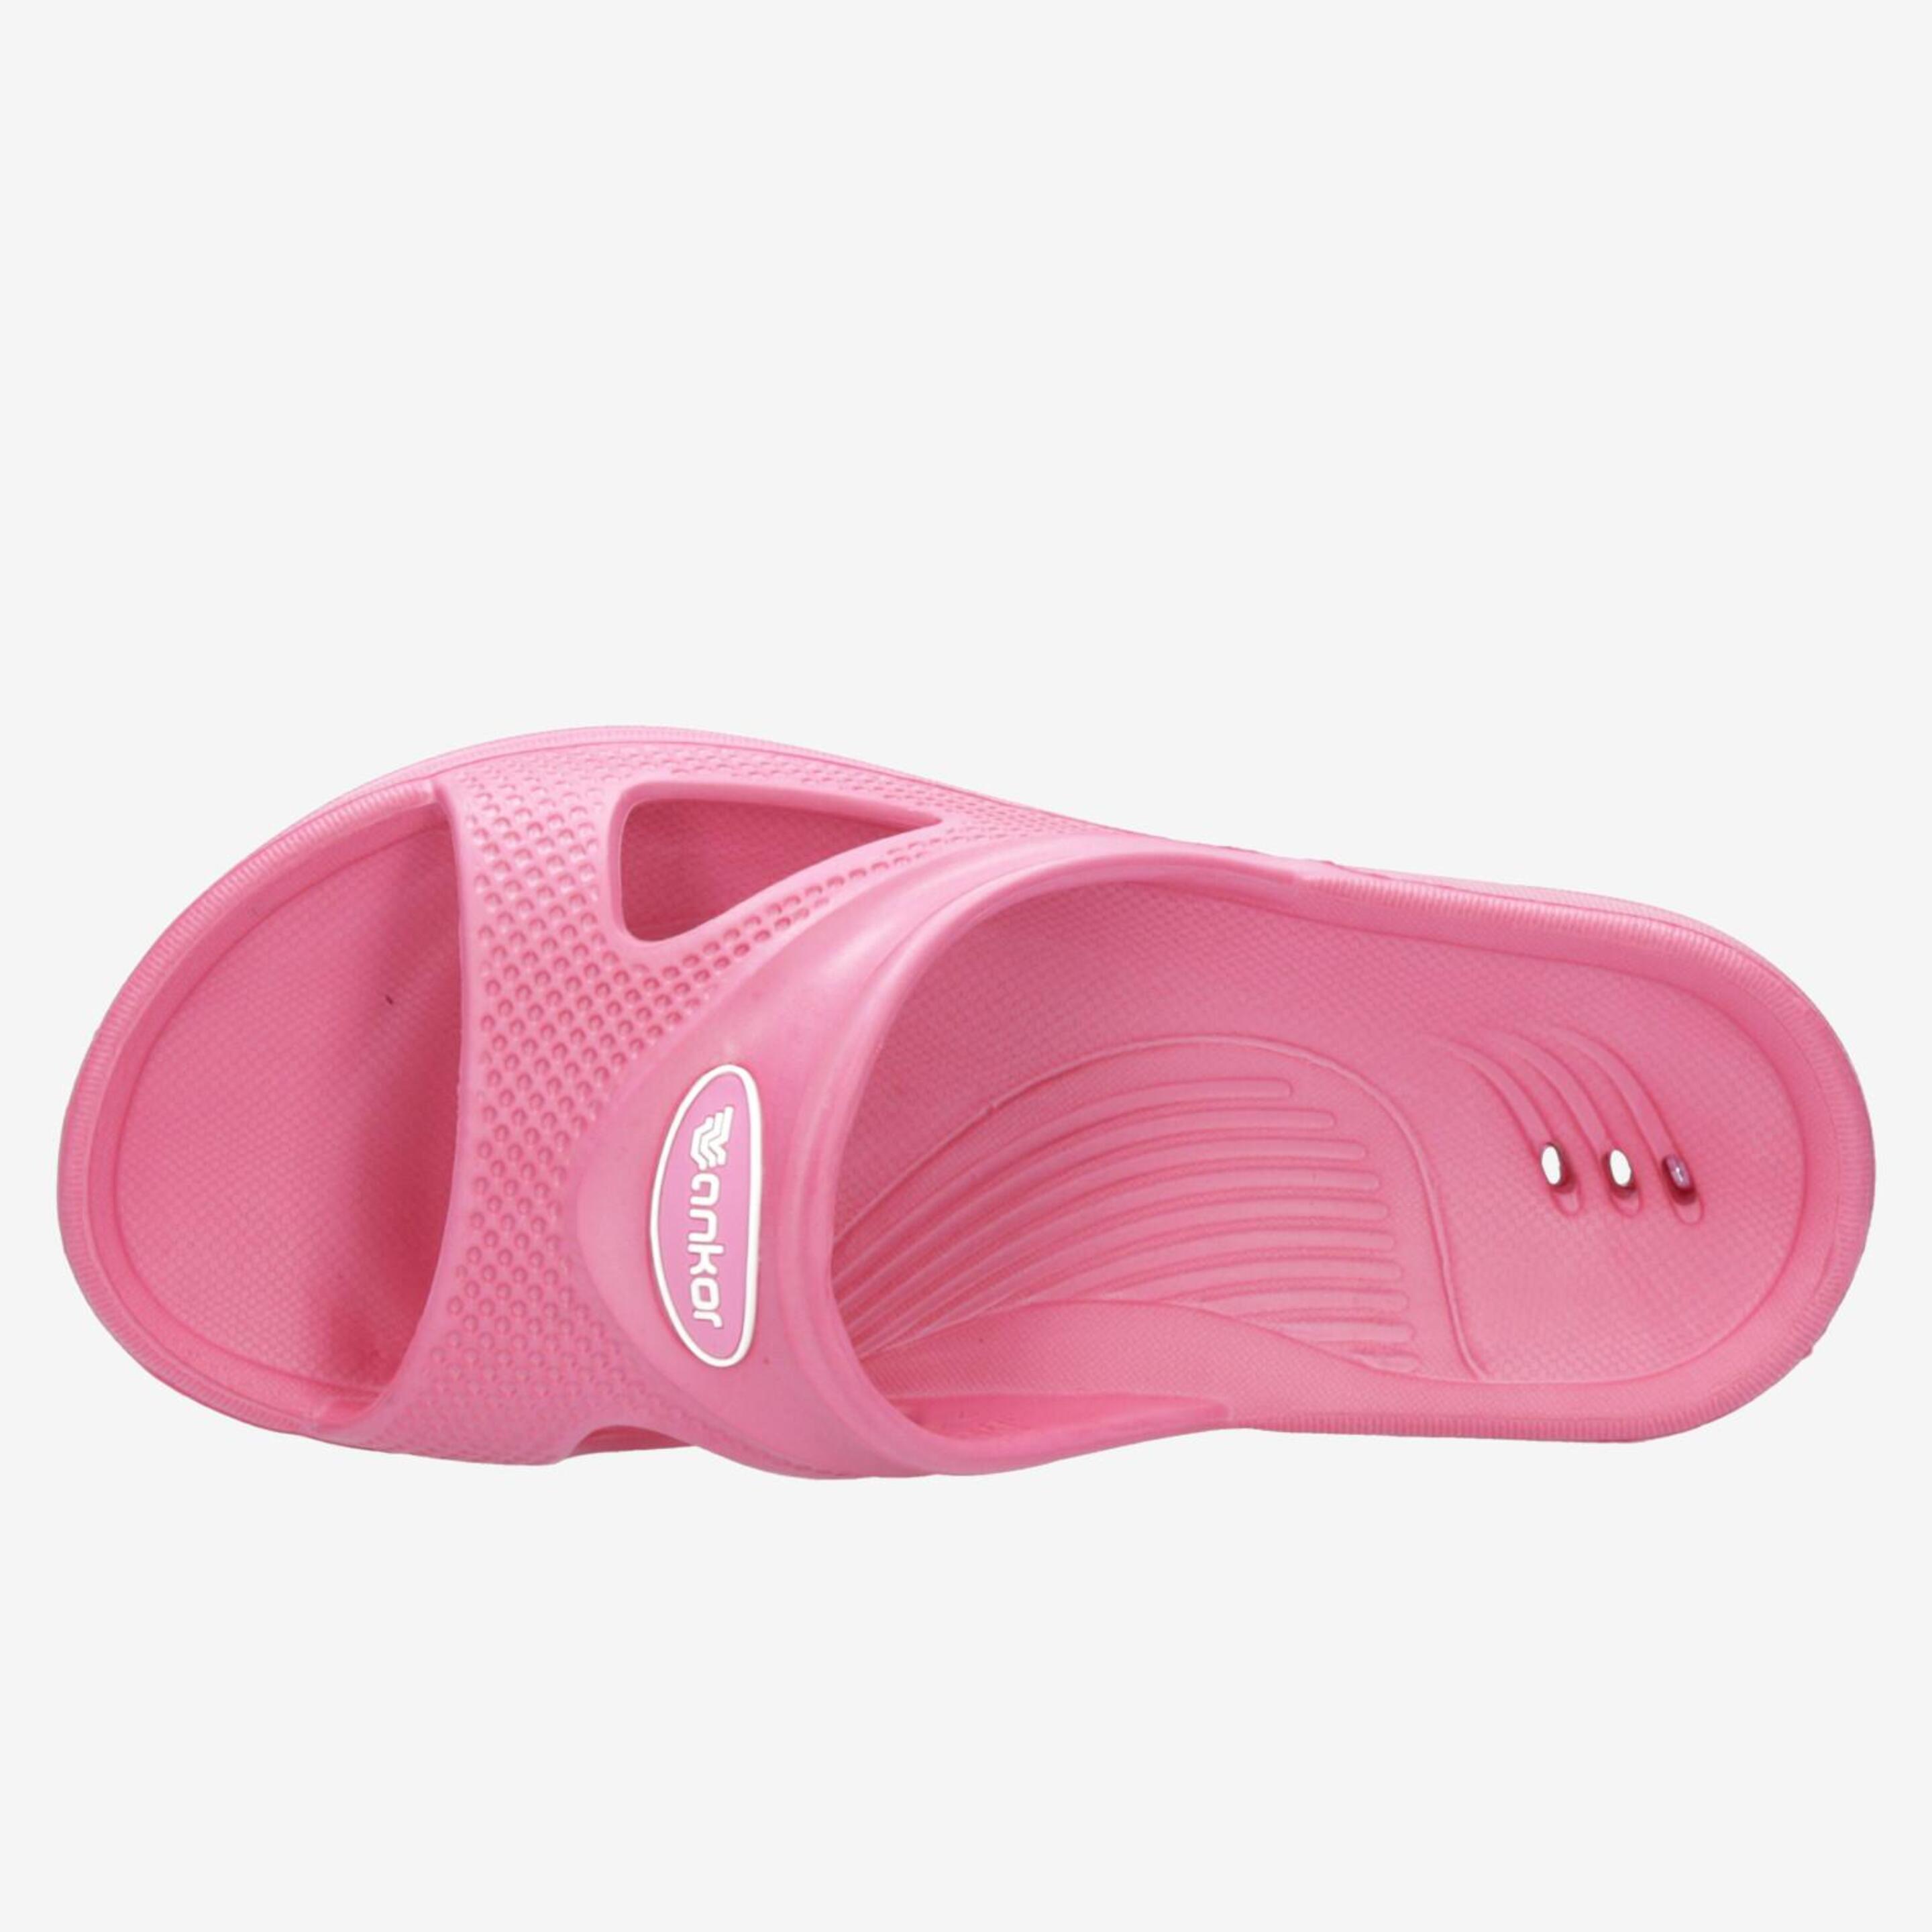 Ankor Done - rosa - Chanclas Mujer